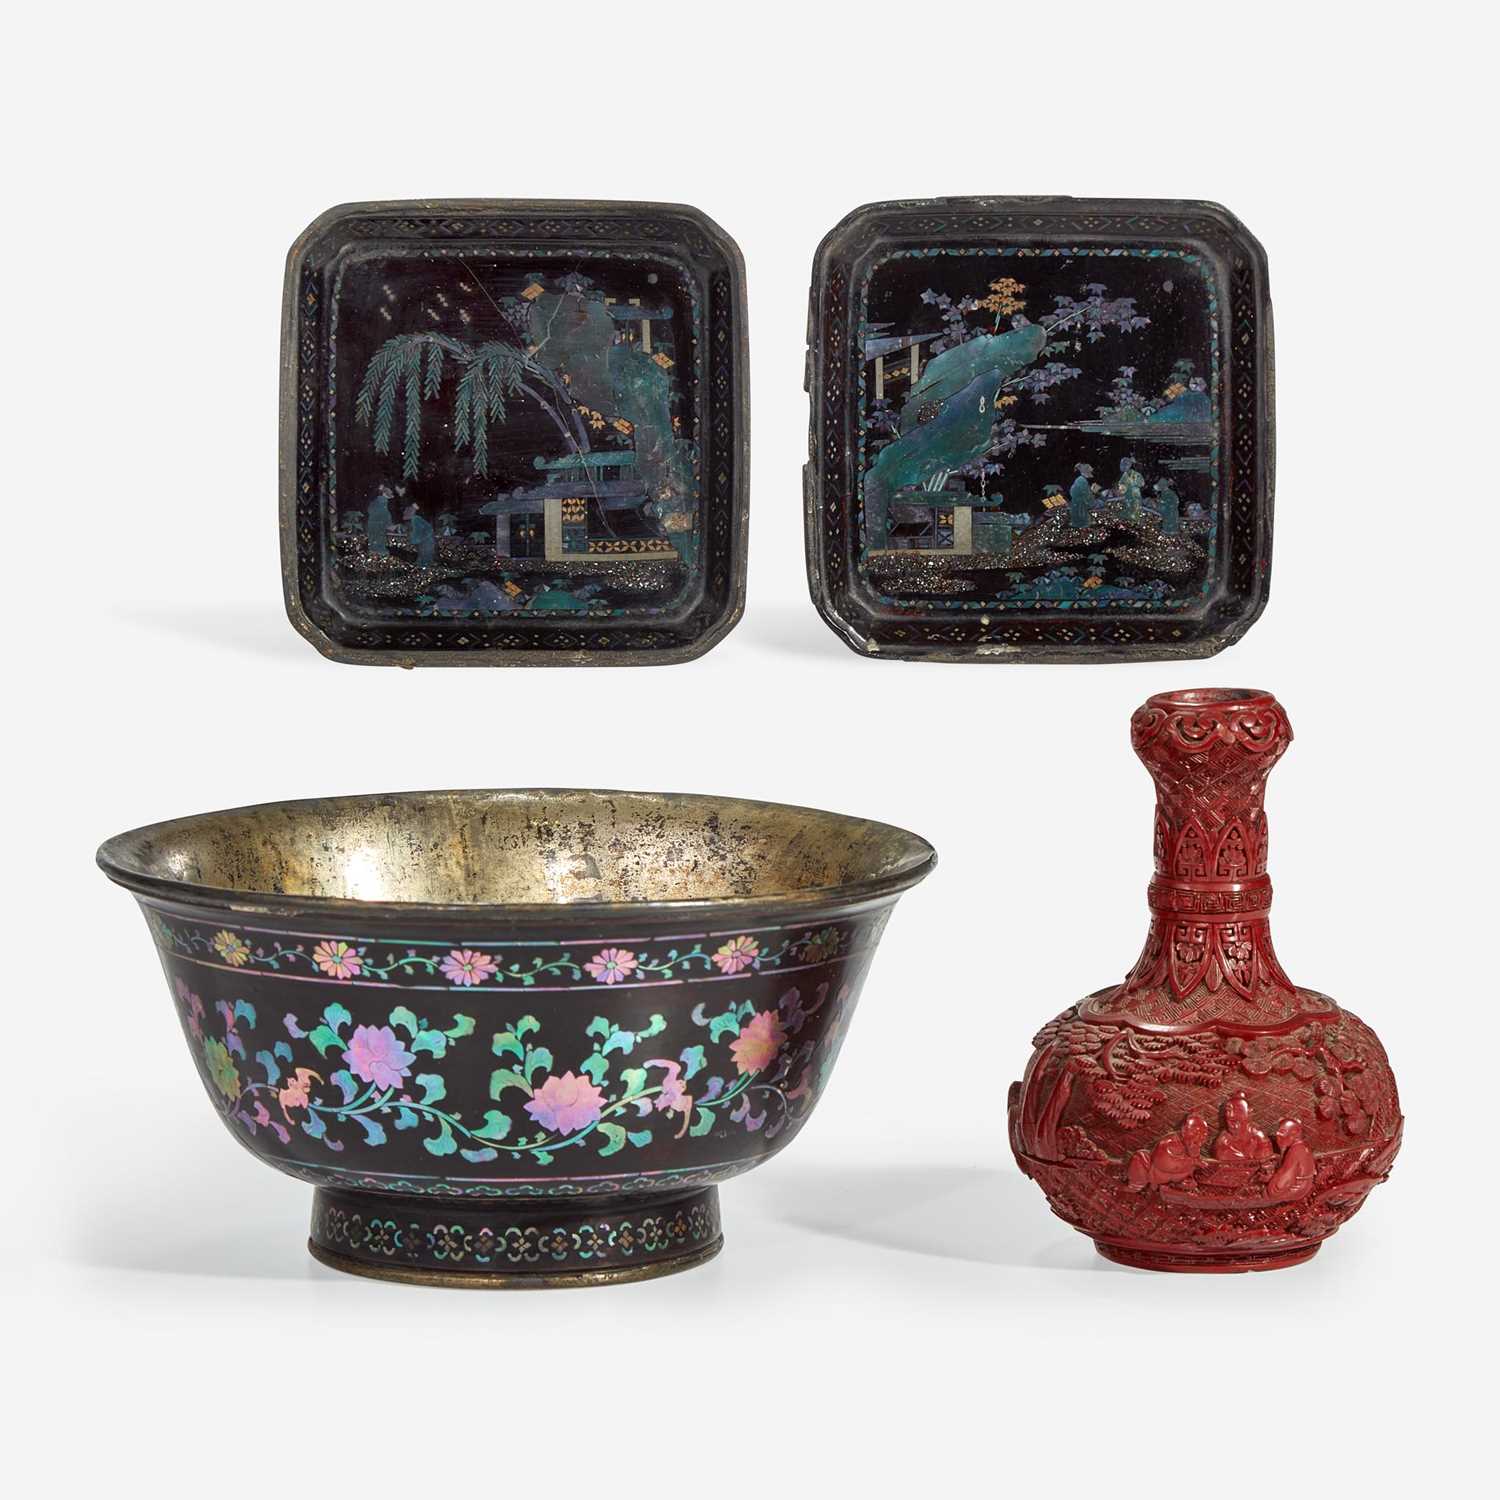 Lot 122 - A Chinese “Lac Burgaute” bowl and two dishes, and a small carved cinnabar lacquer vase